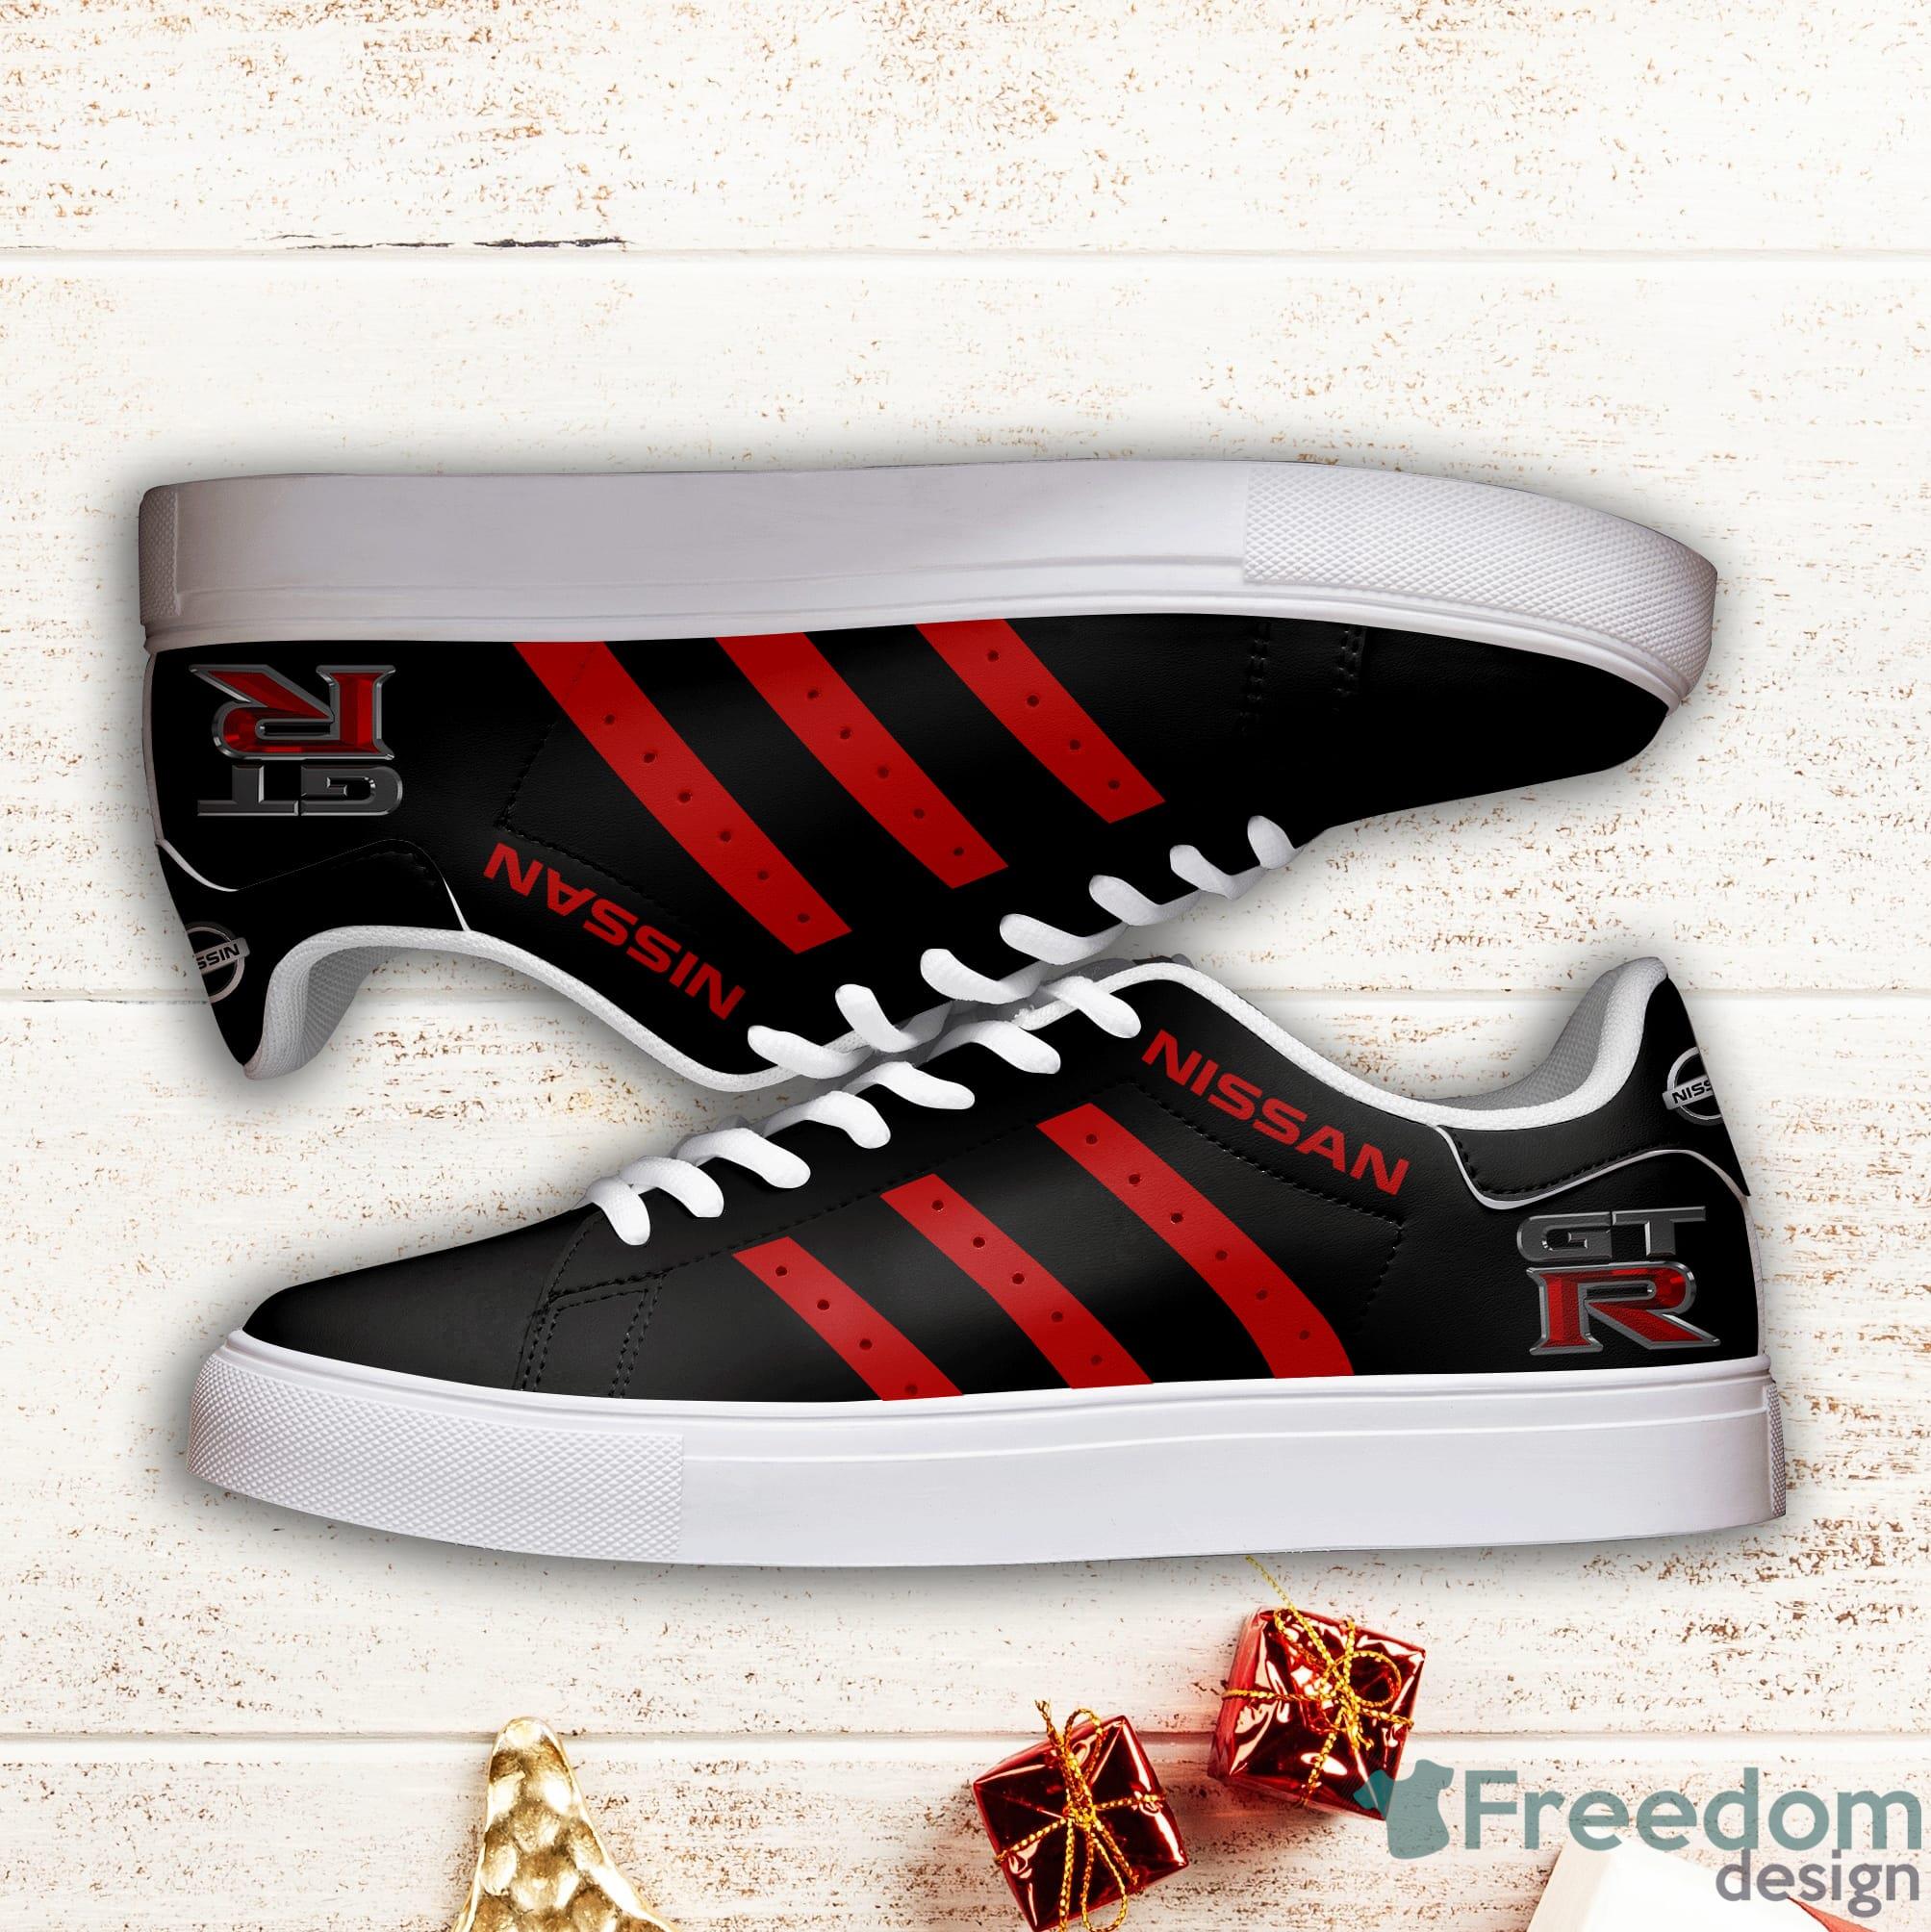 Nissan Gtr Stan Smith Black Low Top Skate Shoes - Freedomdesign